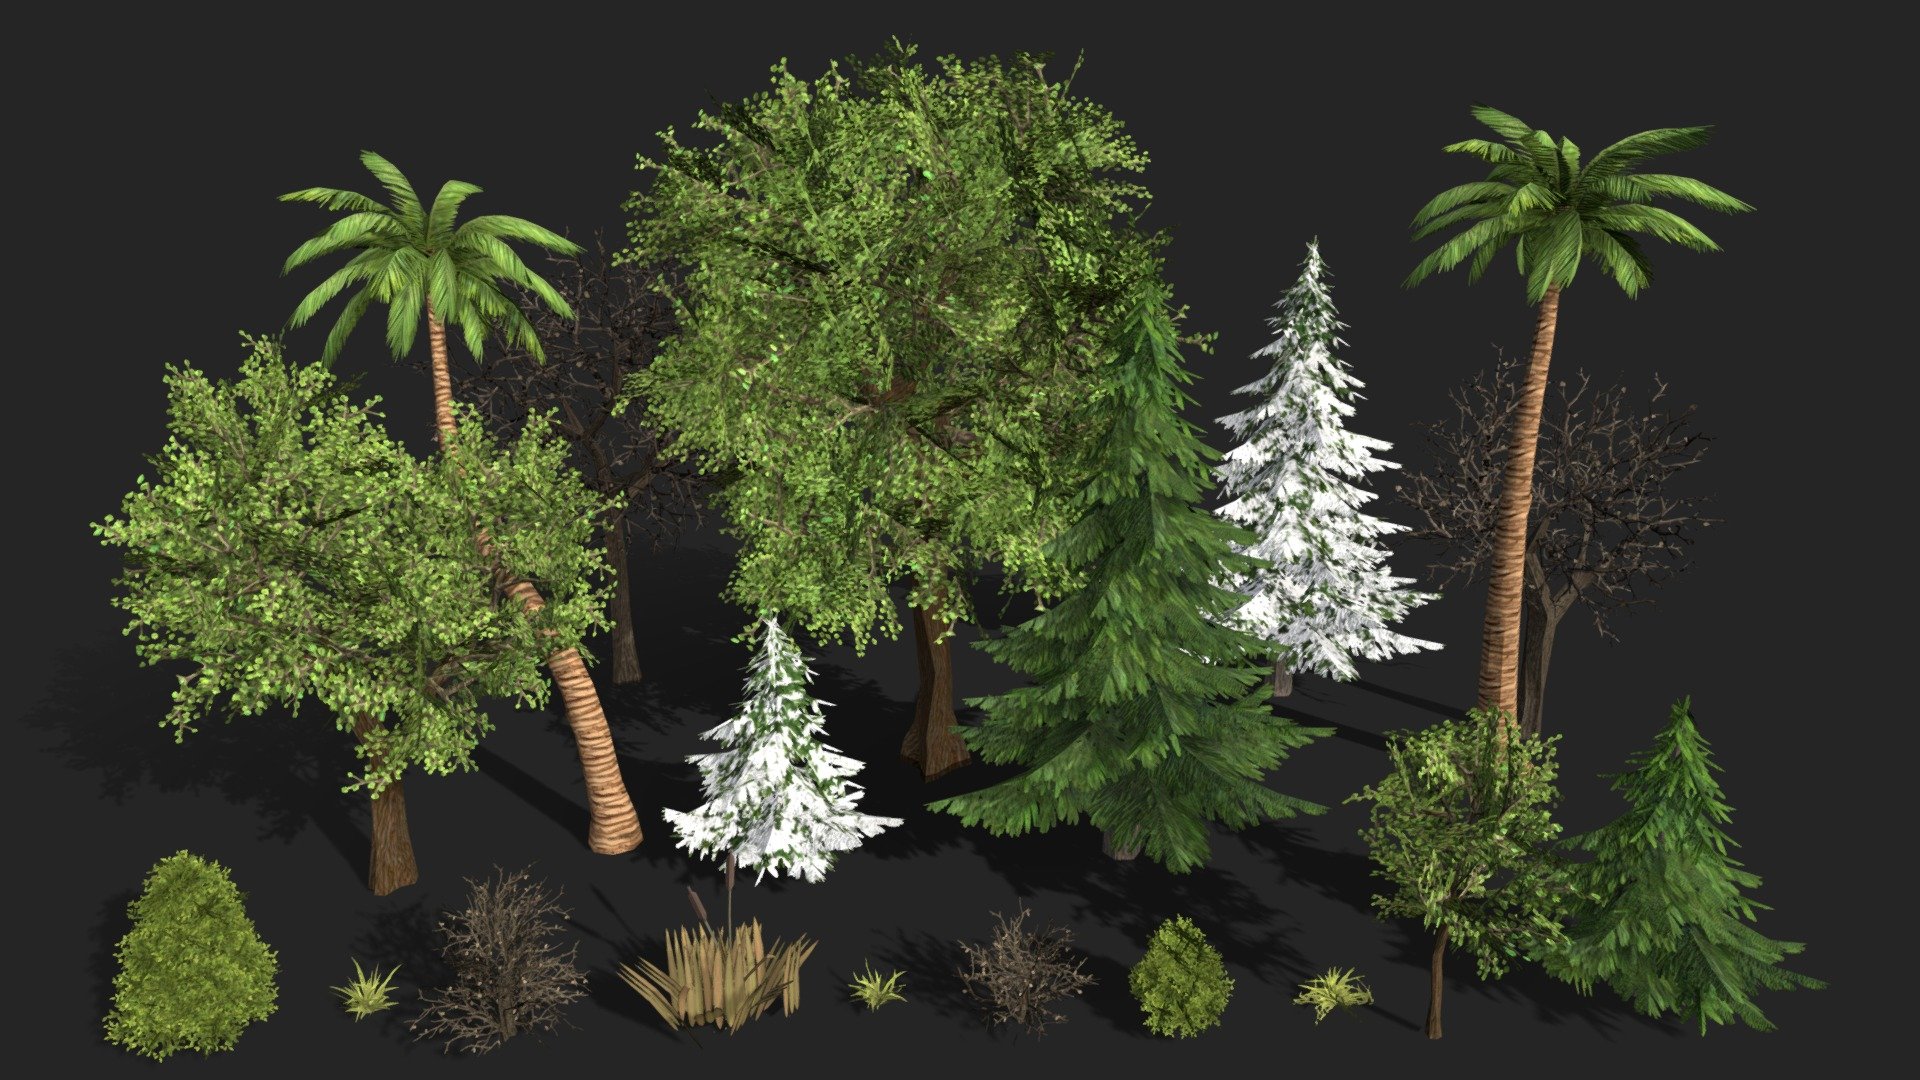 Looking for a comprehensive collection of 3D models to enhance your gaming or real-time projects? Look no further than this incredible bundle of Trees, Fir Trees, Palm Trees, Bushes, Swamp, and Grasses!
With a range of vegetation options to choose from, this bundle is designed to help you create immersive and realistic environments that will captivate your audience. Whether you're working on a new game or a 3D visualization project, these models are perfect for adding depth and realism to your scenes.
So why wait? Get your hands on this amazing bundle today and start bringing your creative vision to life! - Plant Vegetation Pack (LowPoly) - Buy Royalty Free 3D model by Flystyler 3d model